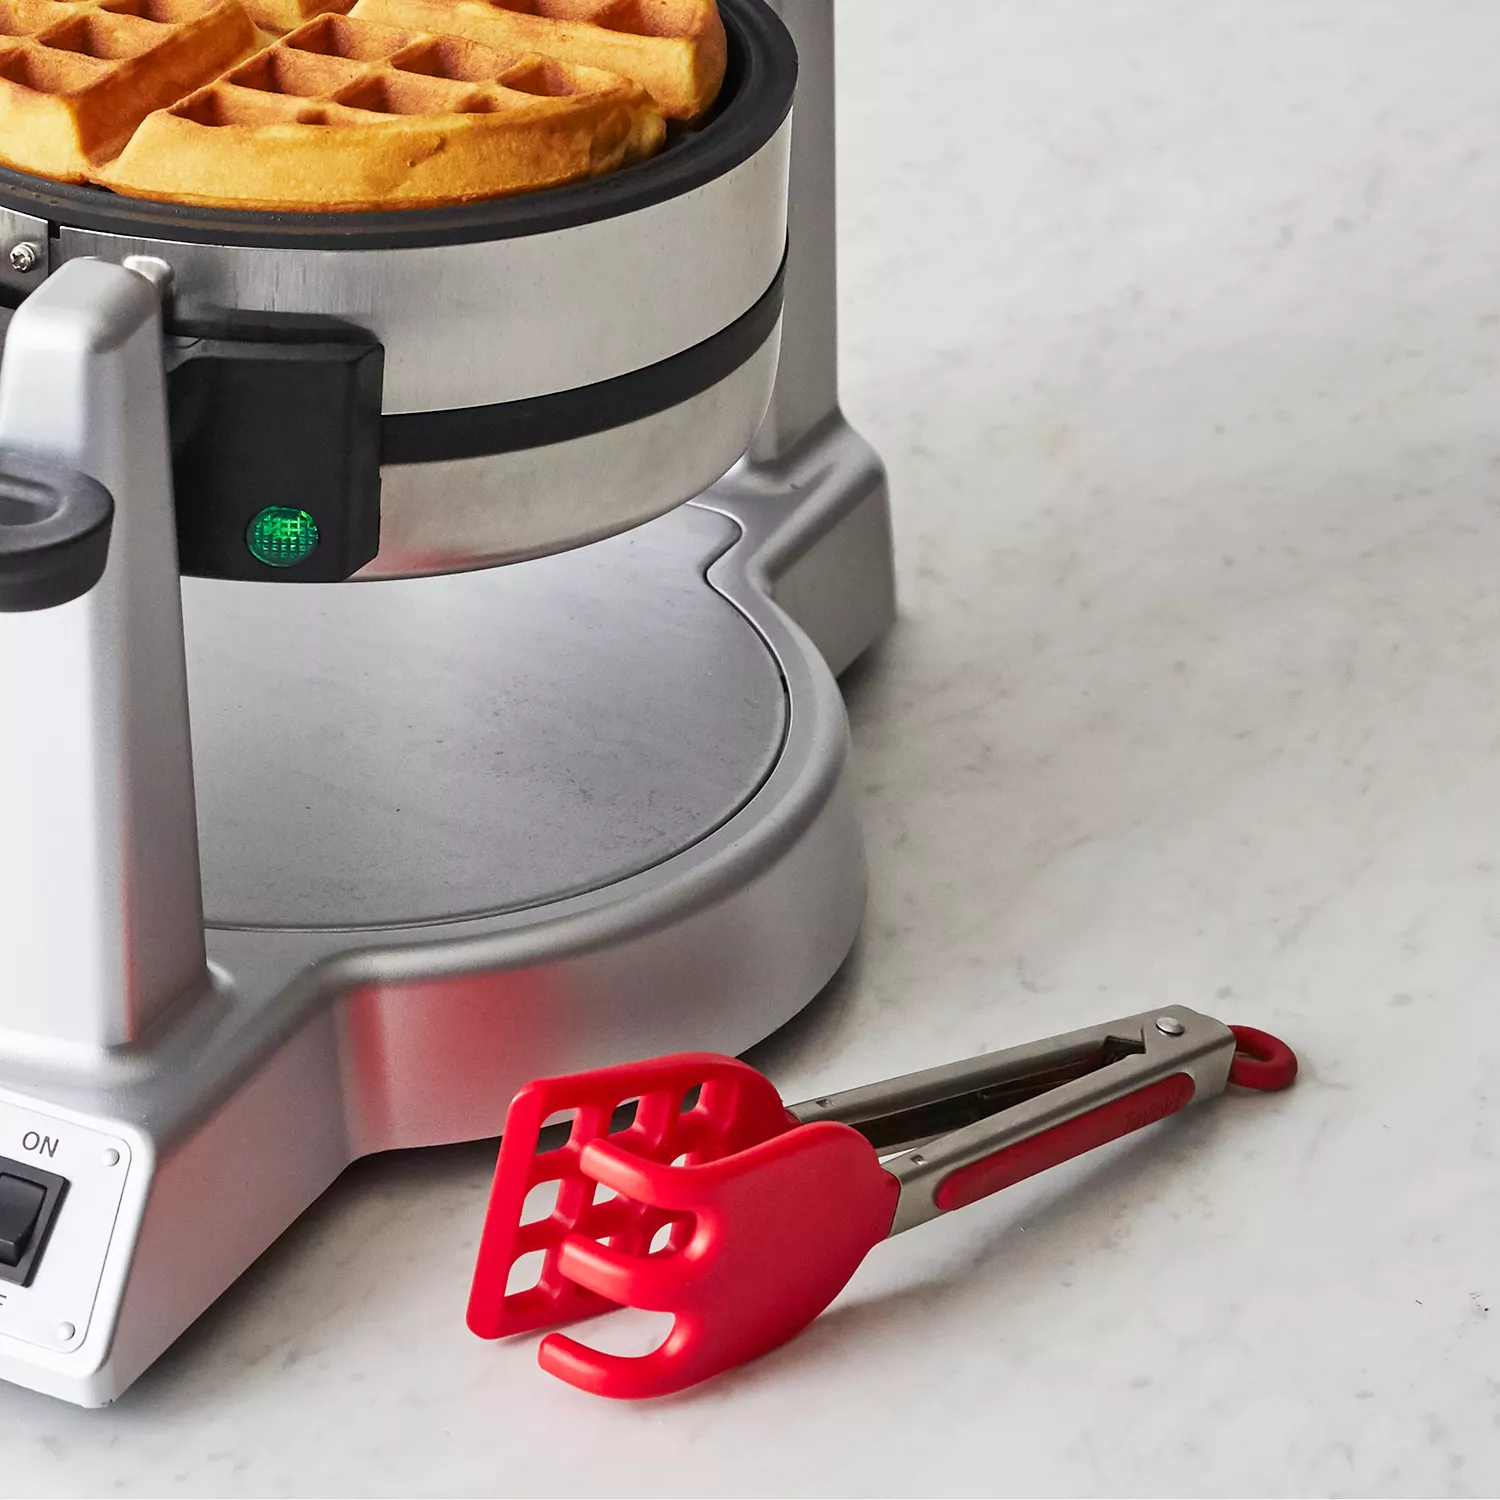 Tovolo Easy-Grip Mini Waffle Non-Slip Stainless Steel Handle,  Heat-Resistant Silicone Heads, Kitchen Tongs for Cooking Waffles &  Breakfast, Charcoal